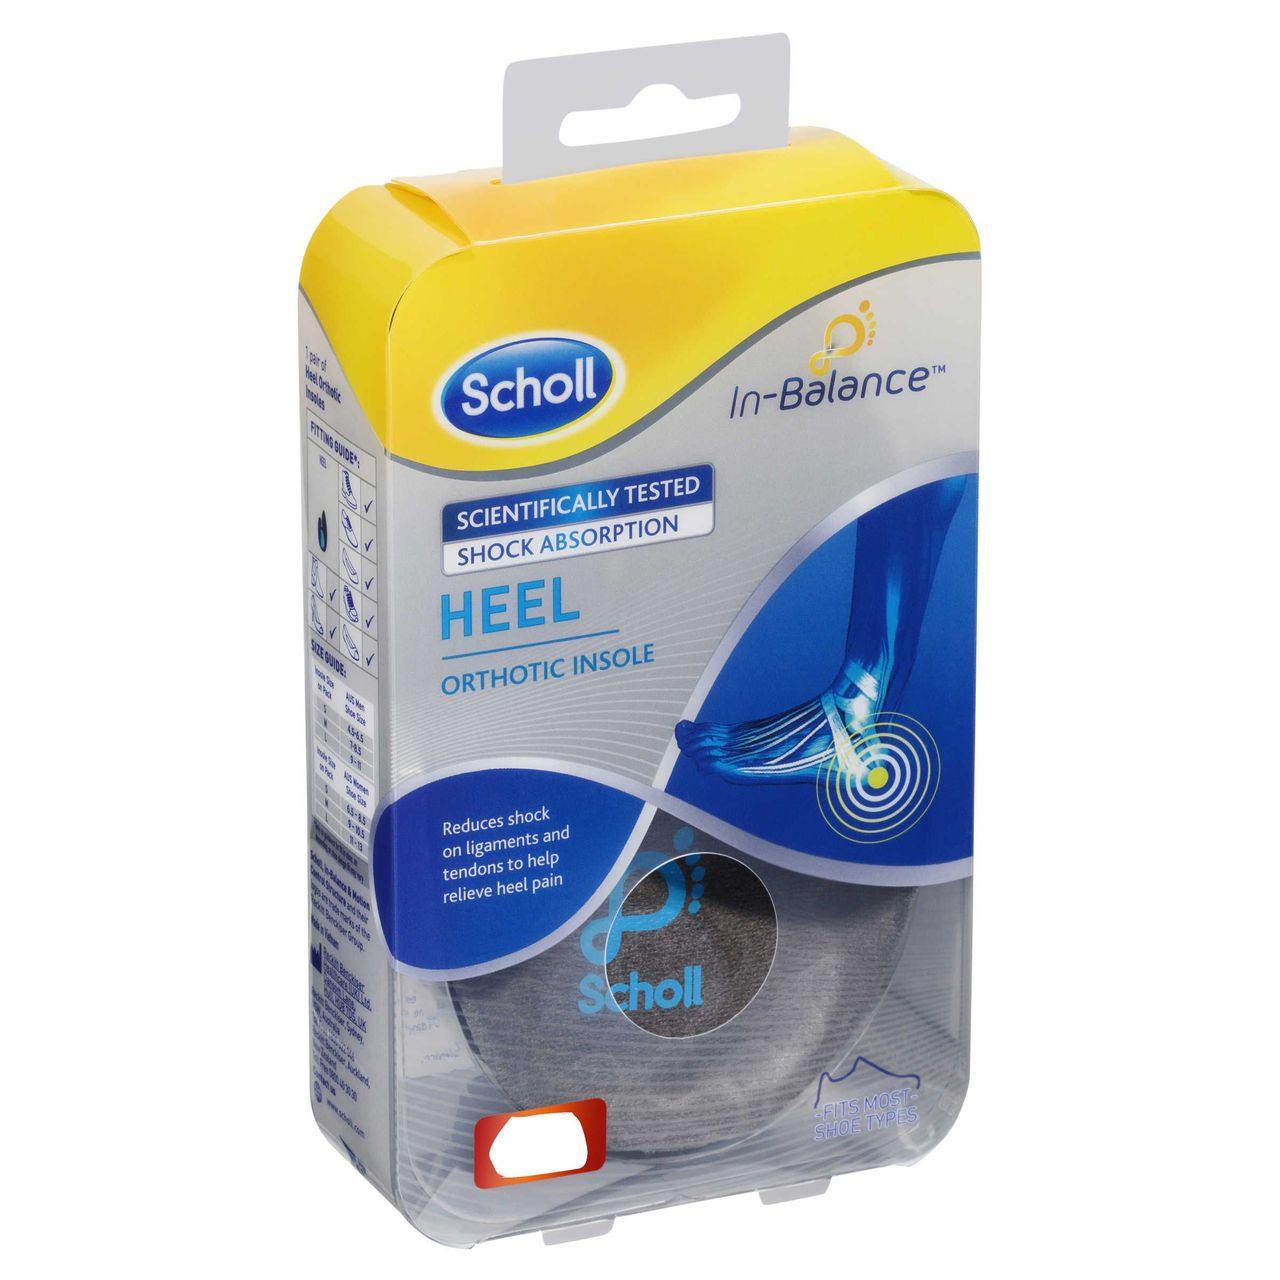 Scholl In-balance Heel &amp; Ankle Orthotic Insole Medium